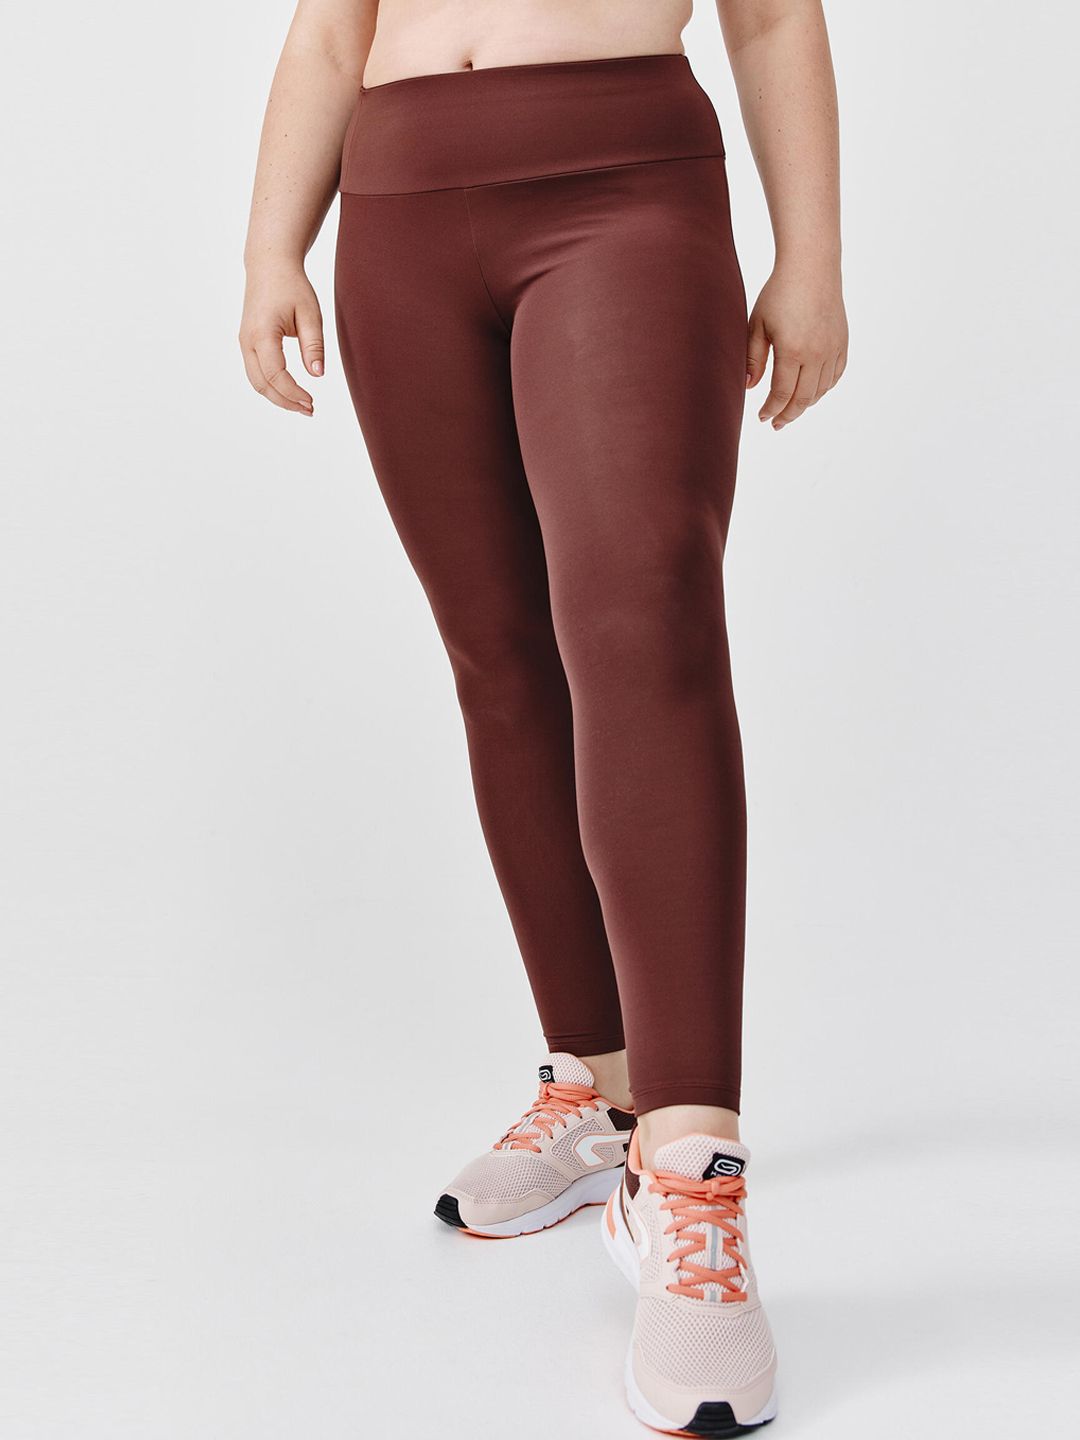 Kalenji By Decathlon Women Brown Solid Running Long Tights Price in India